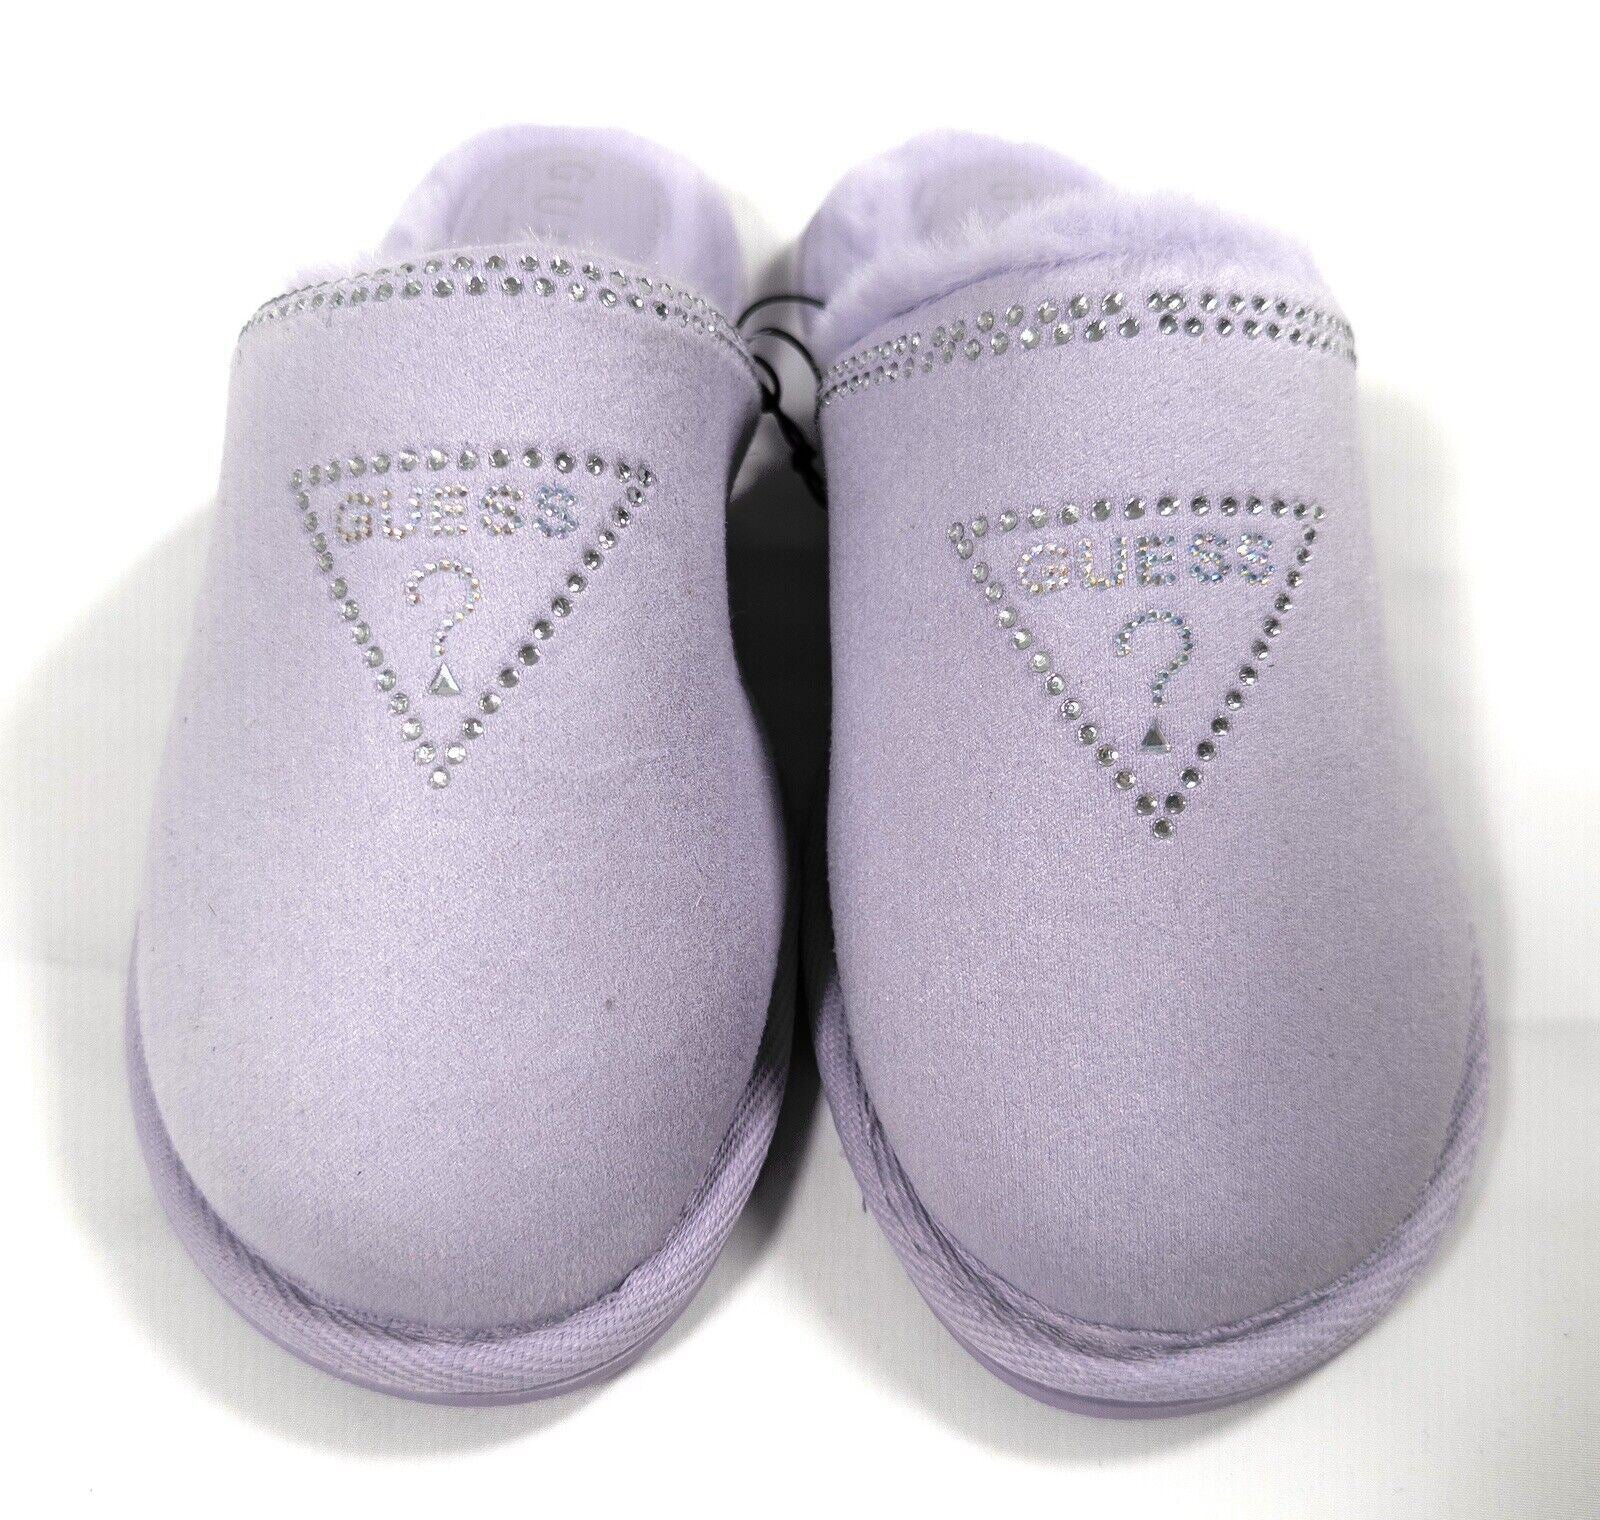 GUESS Women's Lilac Slip On Slippers Fluffy Size UK 4